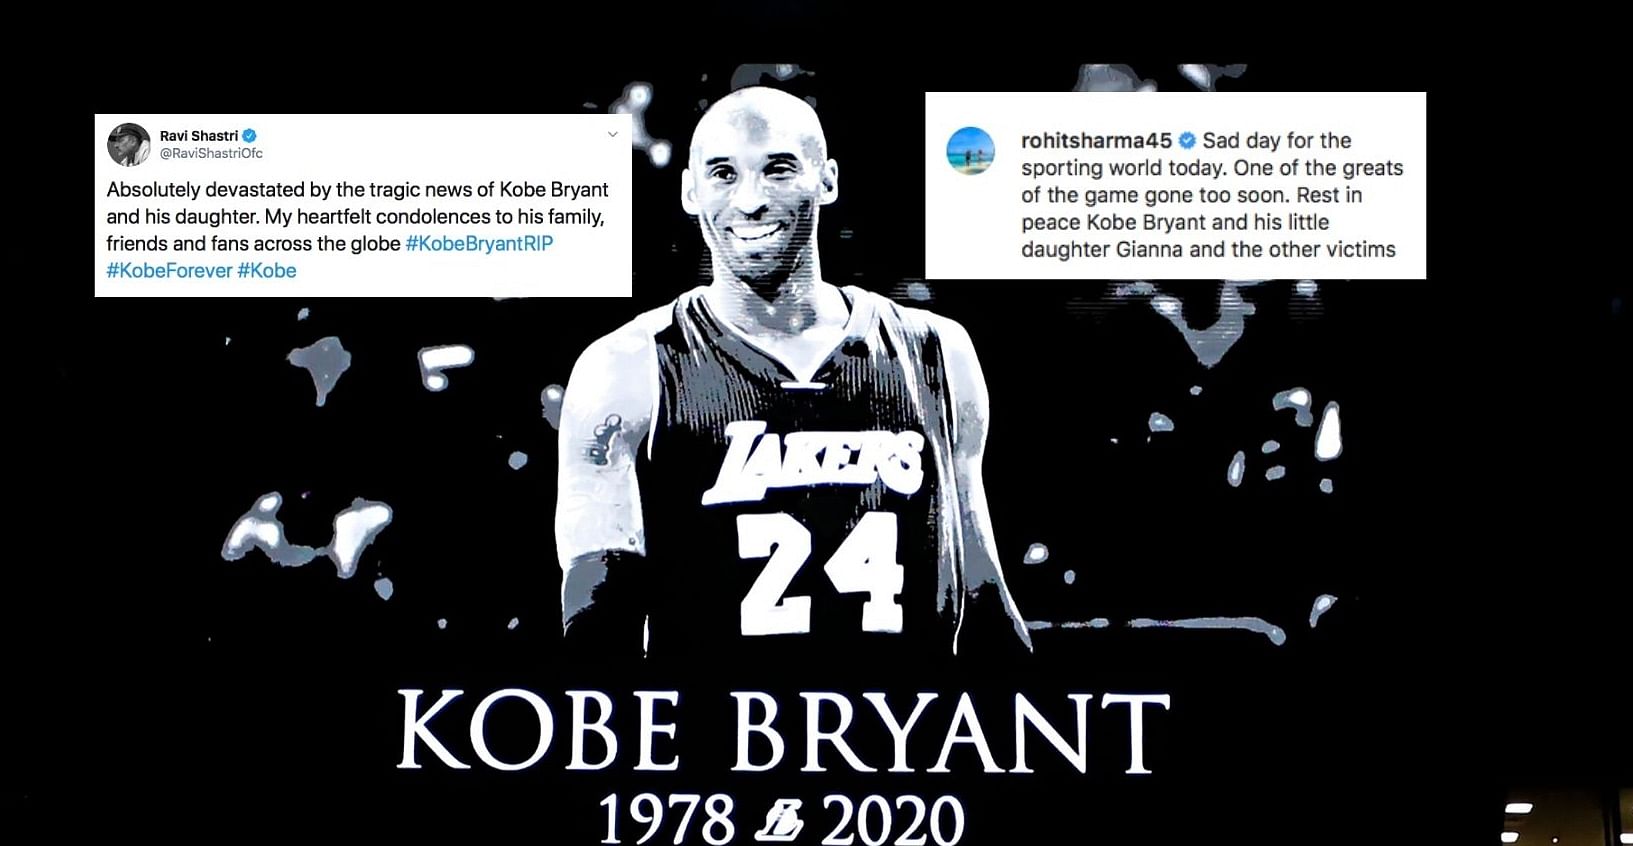 The cricket fraternity on Monday came in unison, 27 January to condole the untimely demise of NBA legend Kobe Bryant, who was killed in a helicopter crash.